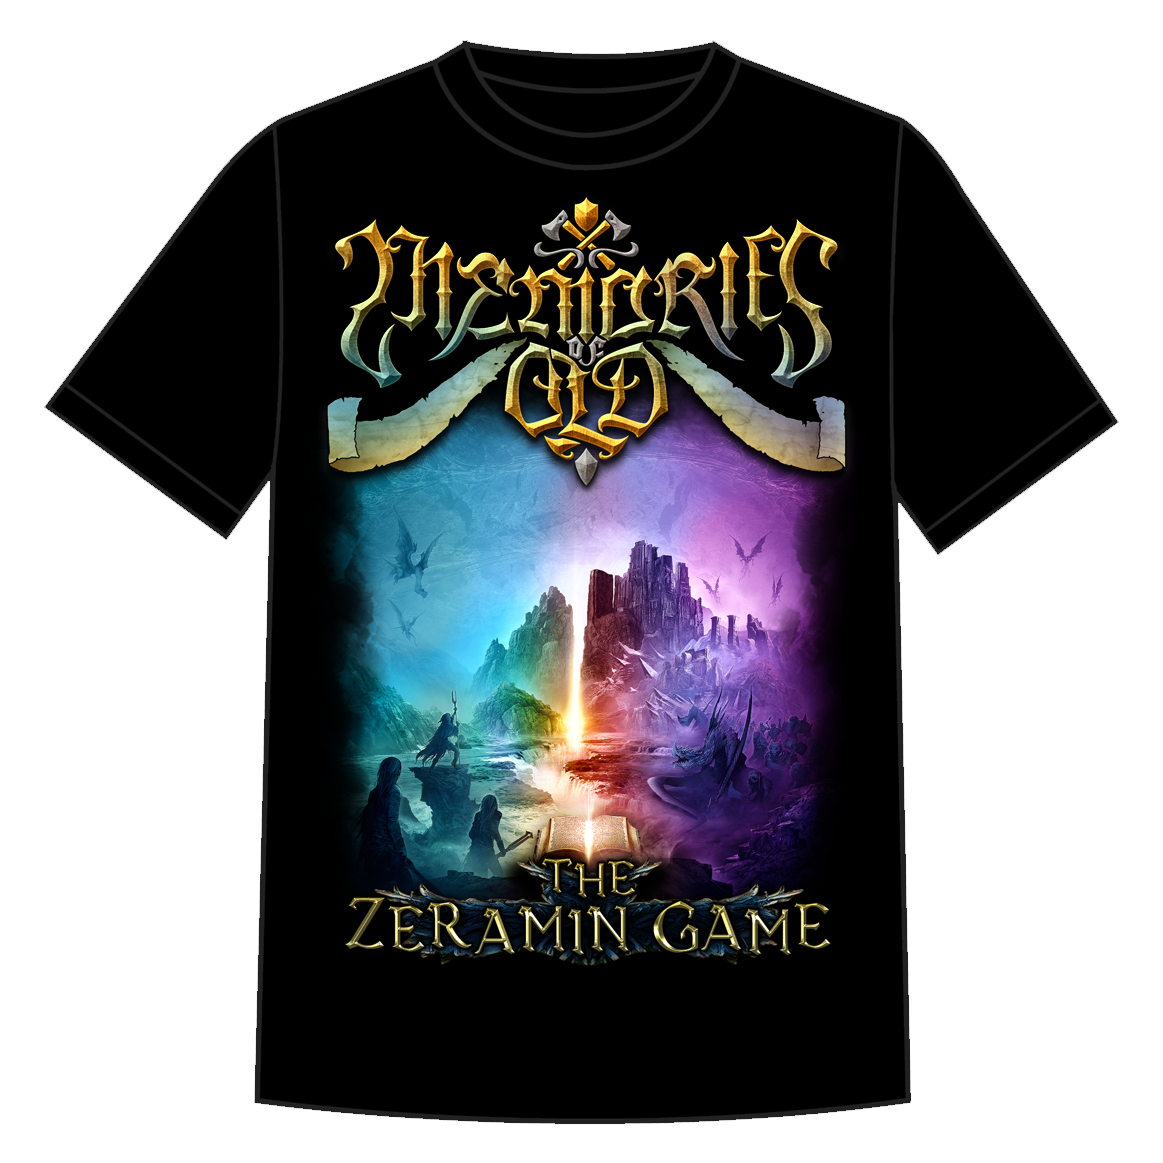 MEMORIES OF OLD - The Zeramin Game T-Shirt size S